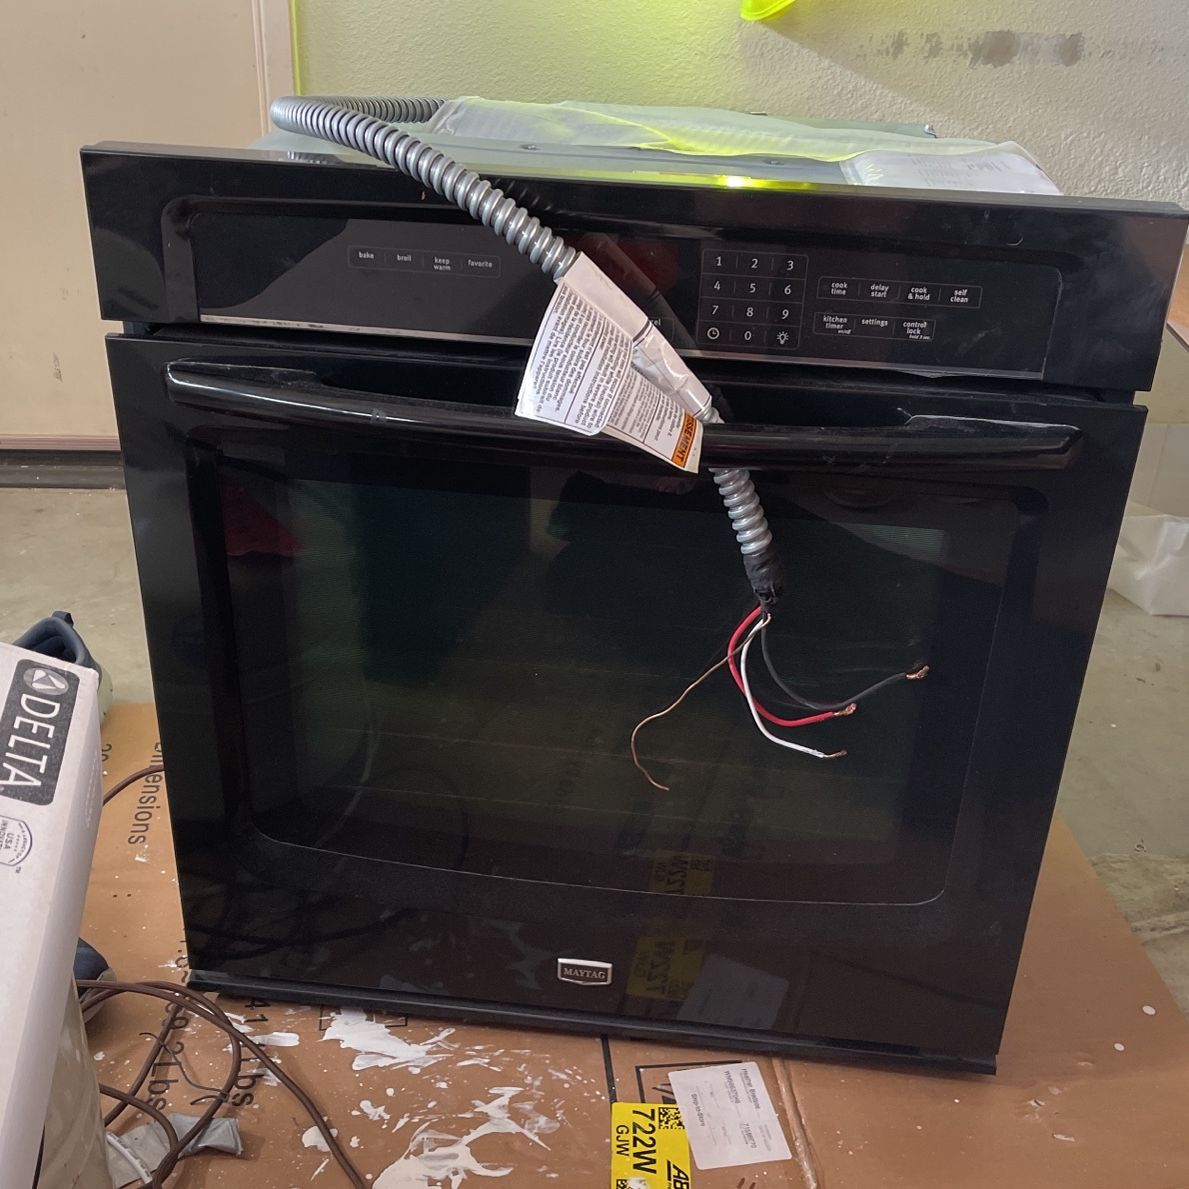 Maytag in wall Convection Oven